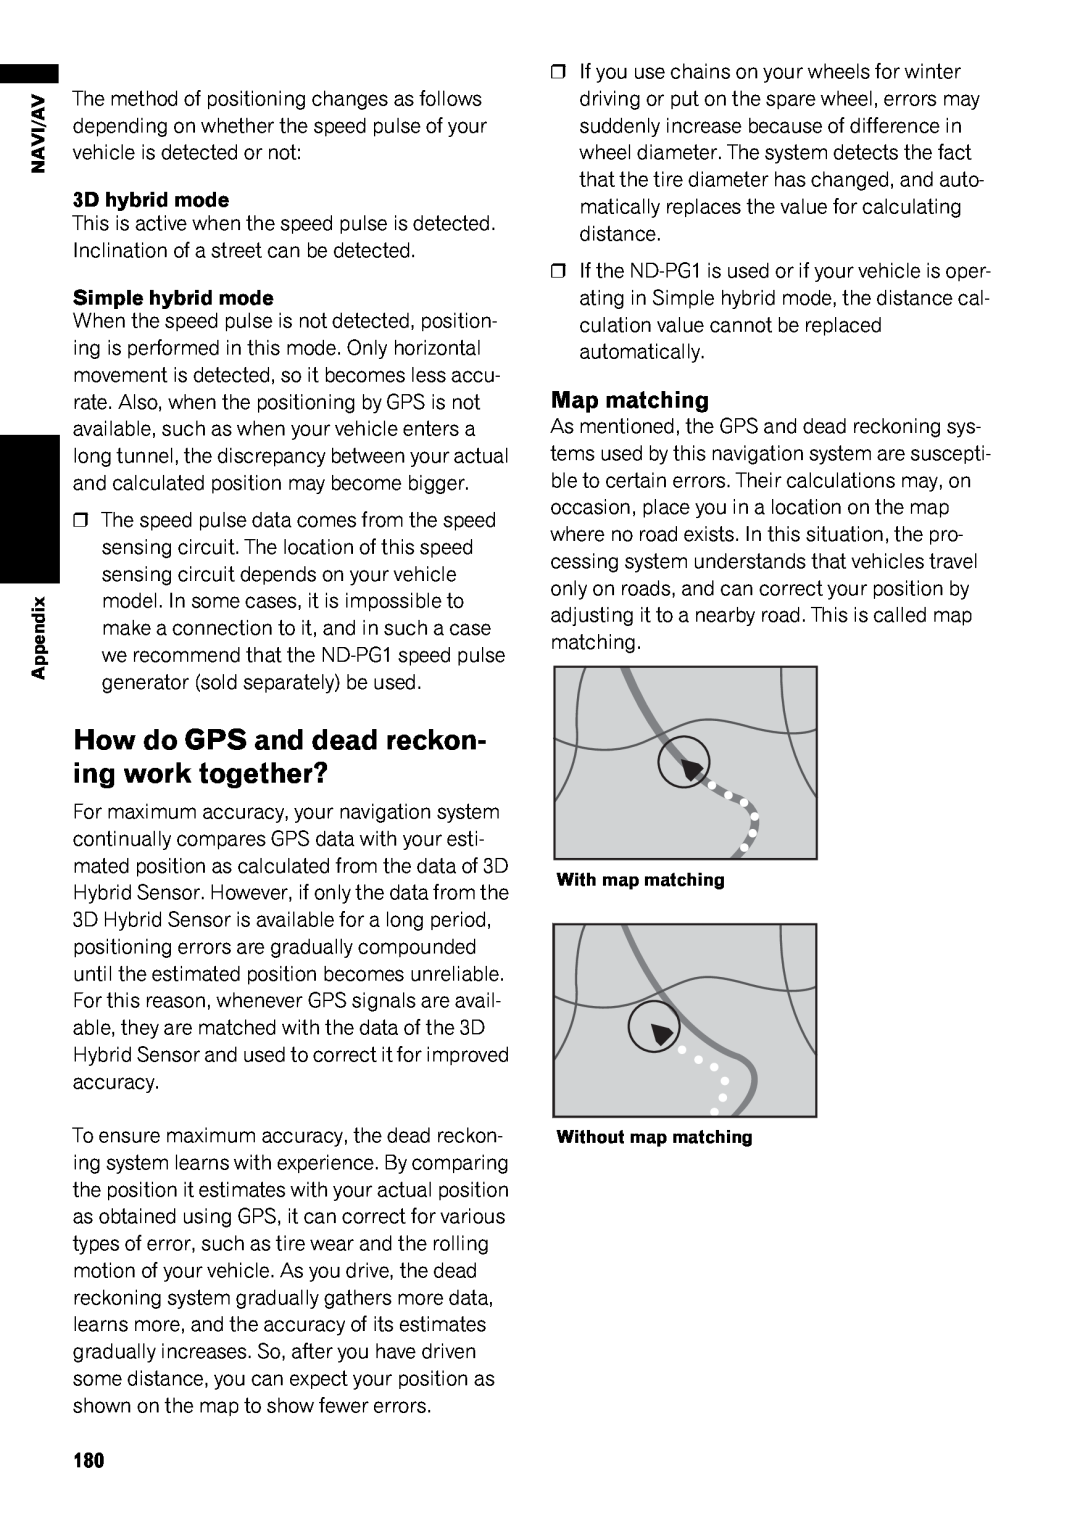 Pioneer AVIC-Z1 operation manual How do GPS and dead reckon- ing work together?, Map matching 